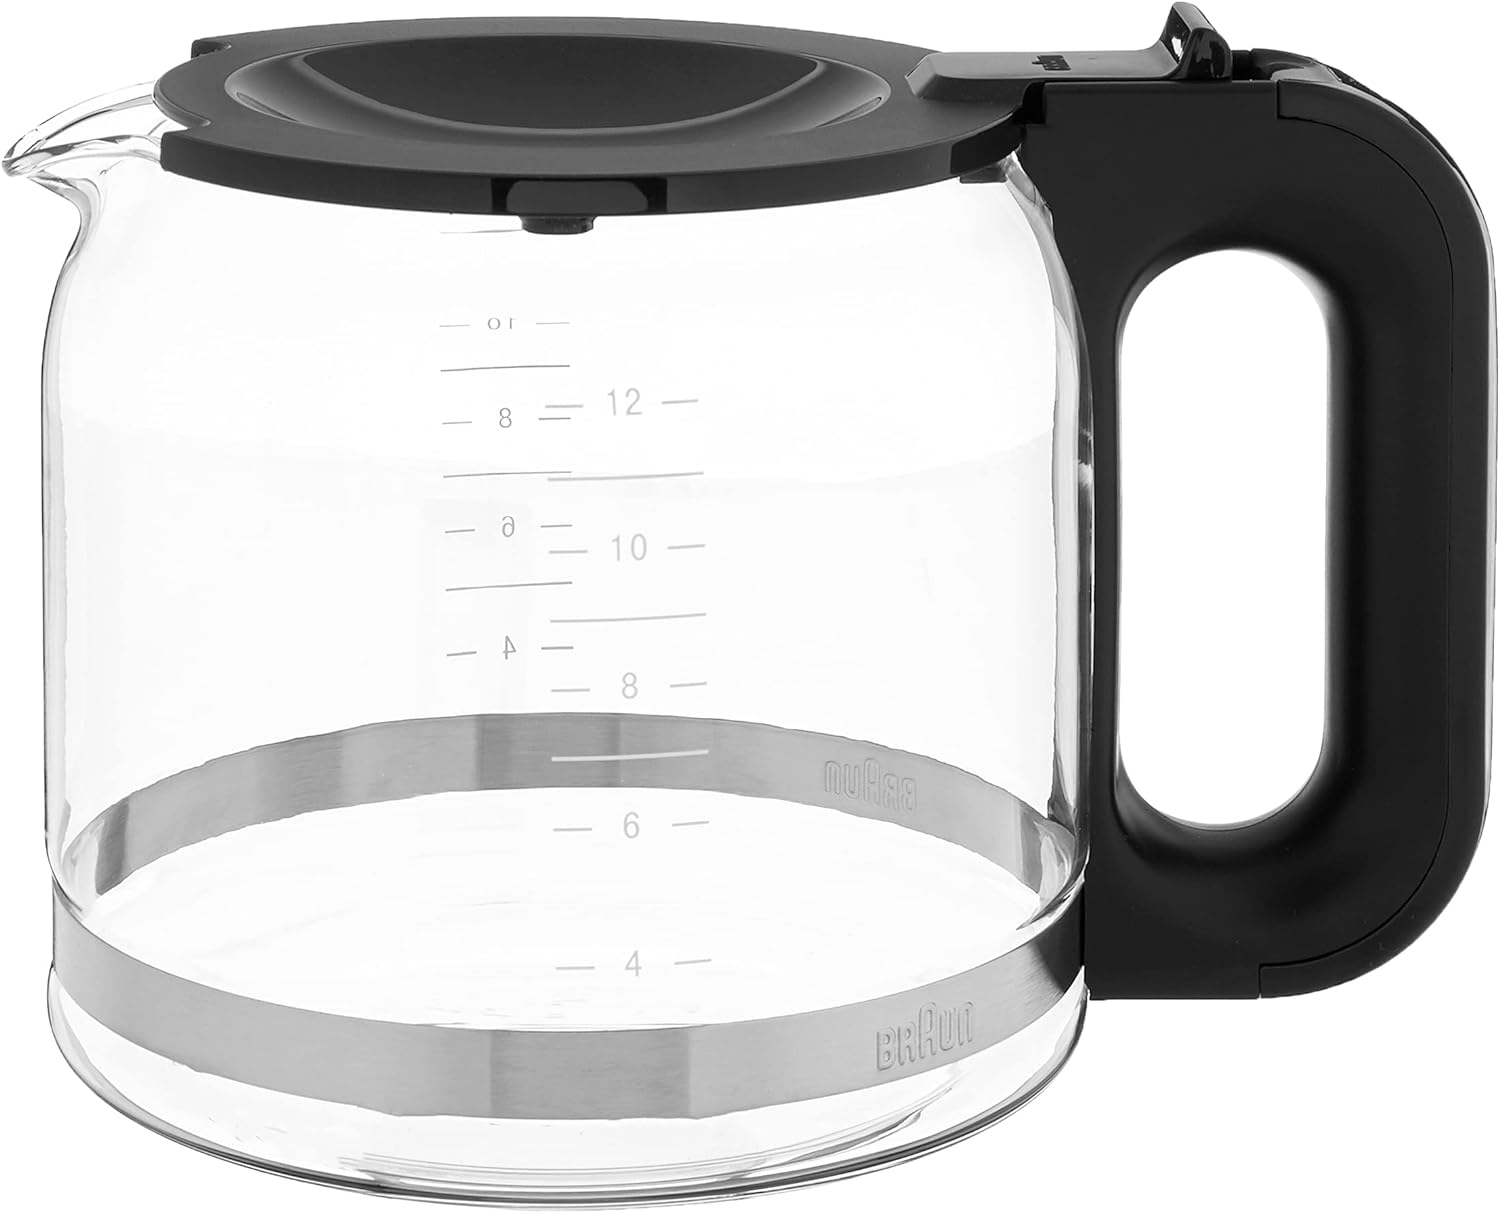 Perfect replacement carafe for my Braun coffee maker. Exactly the same as the original one.